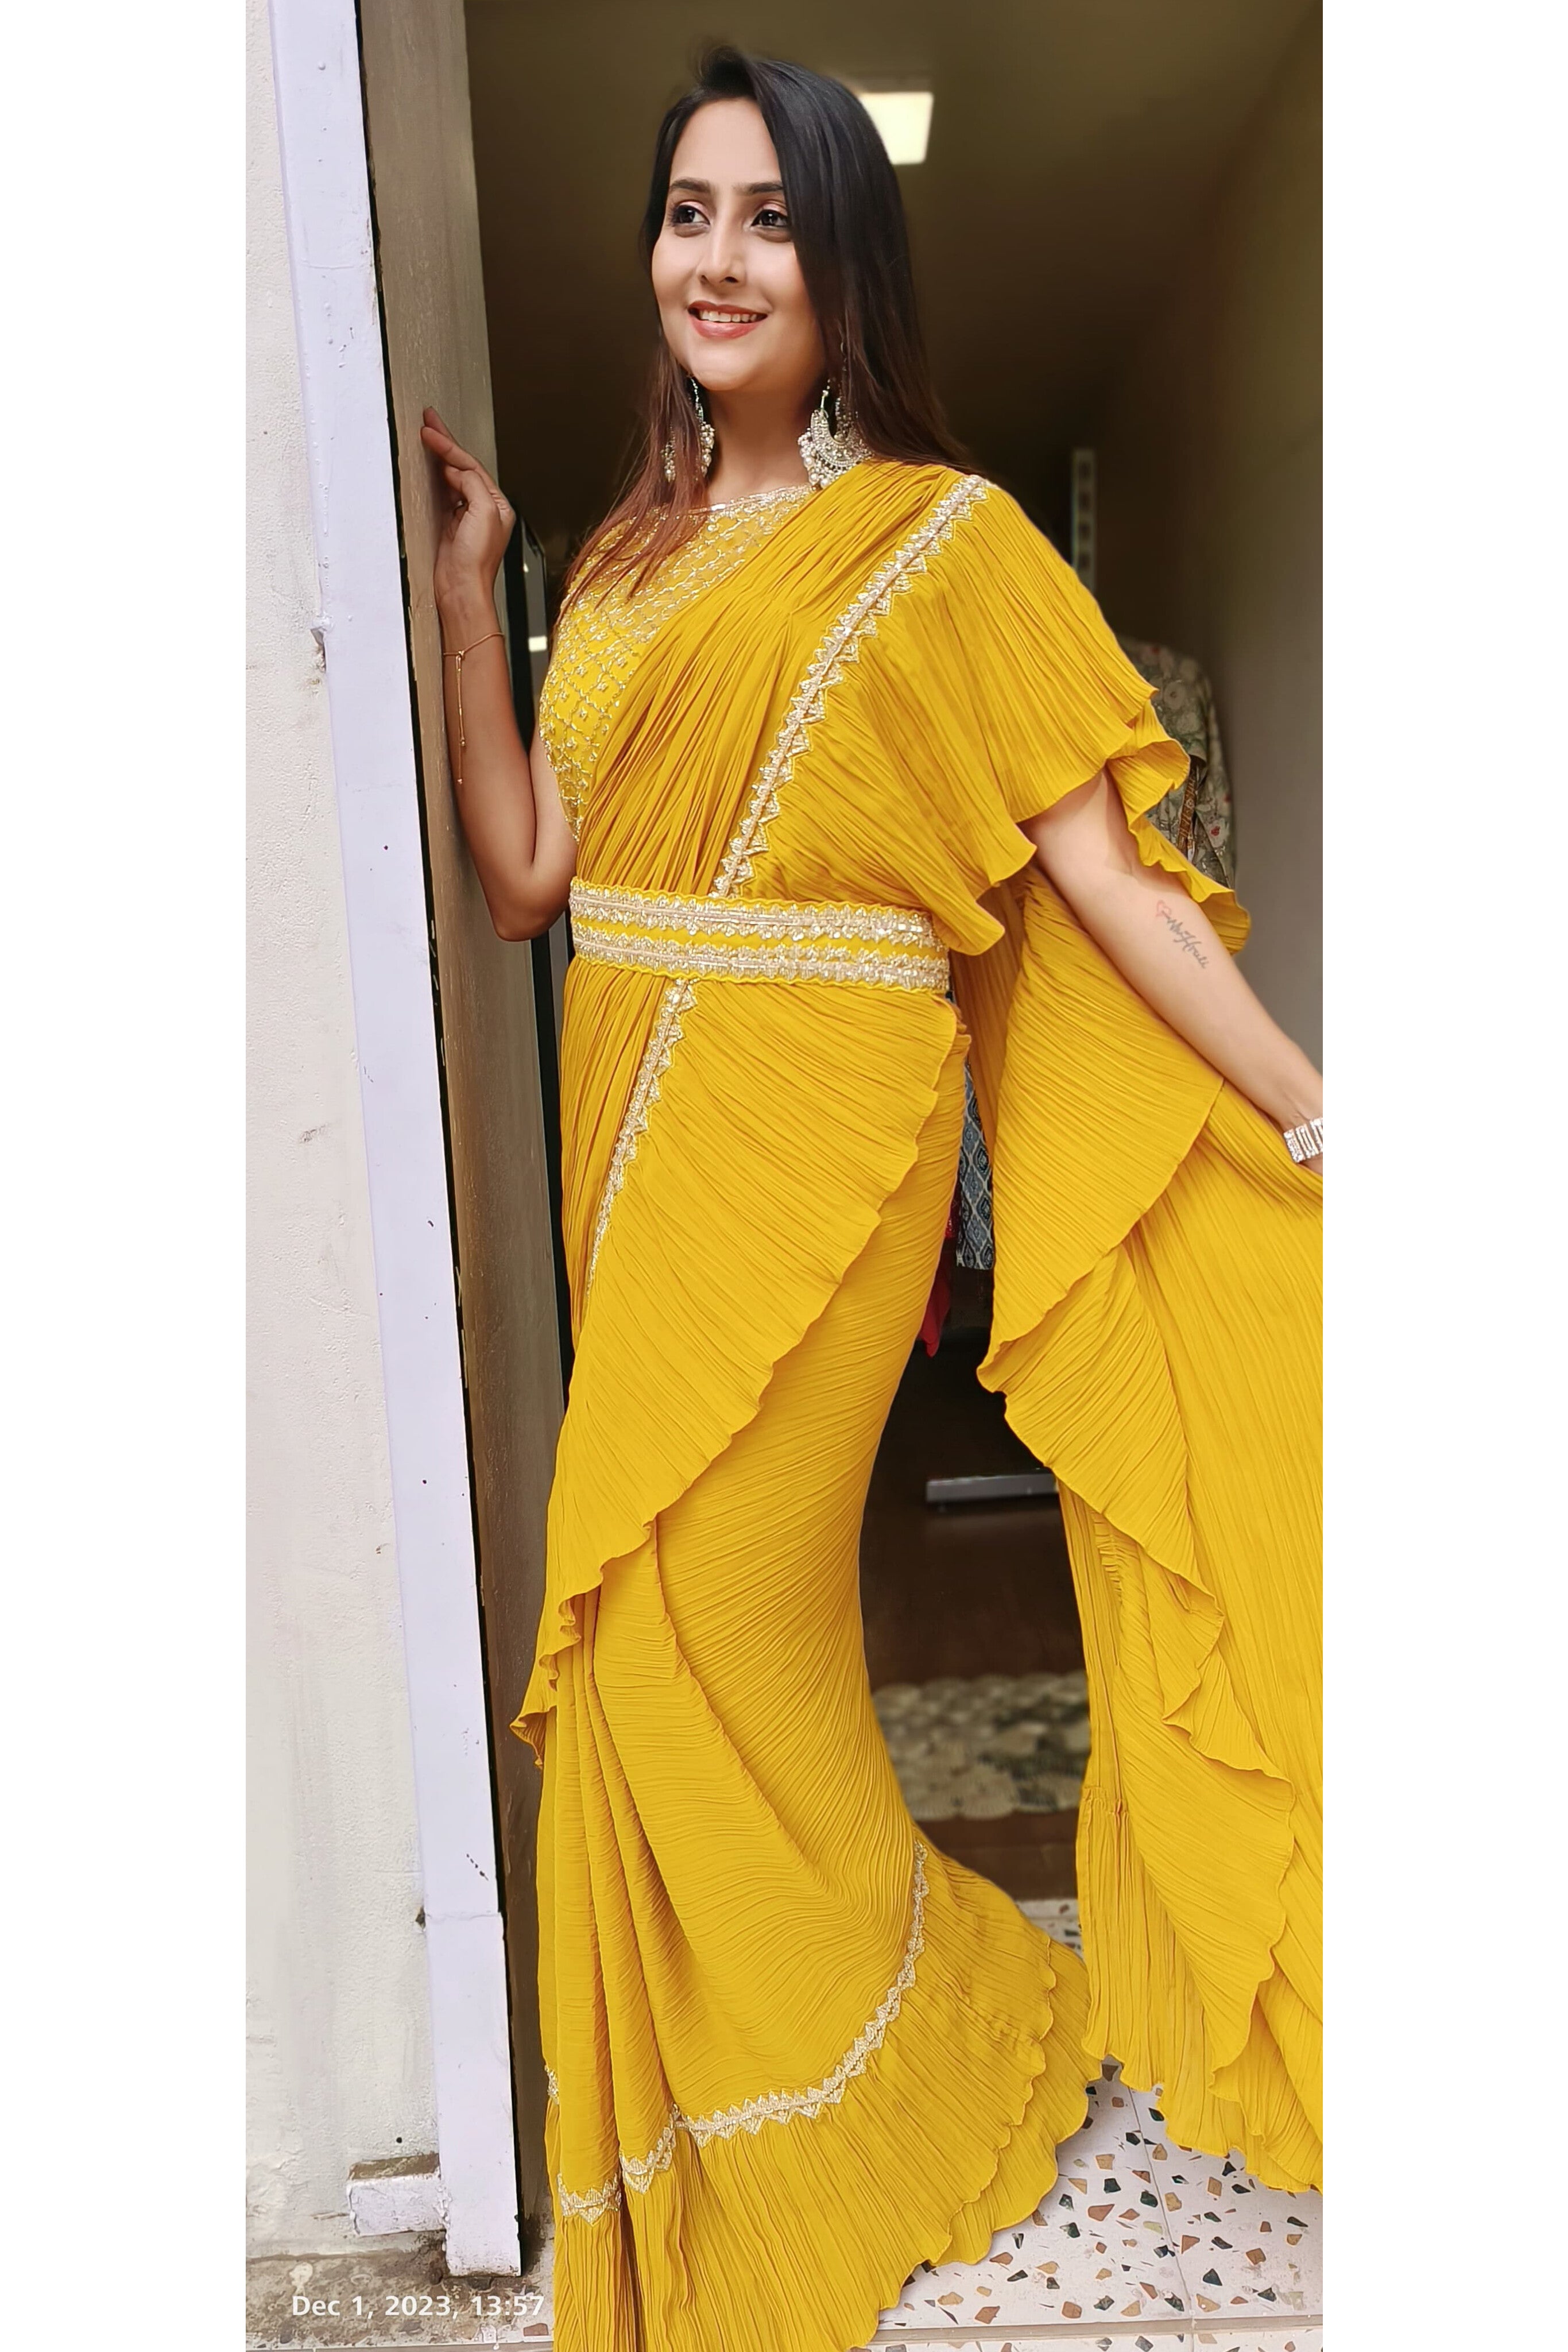 Beautiful crushed Stylish cut dana embroidery heavy netted padded sleeveless Blouse drape style ruffel saree  with belt sleeves attached inside DRY WASH -03640)Ready to wear saree